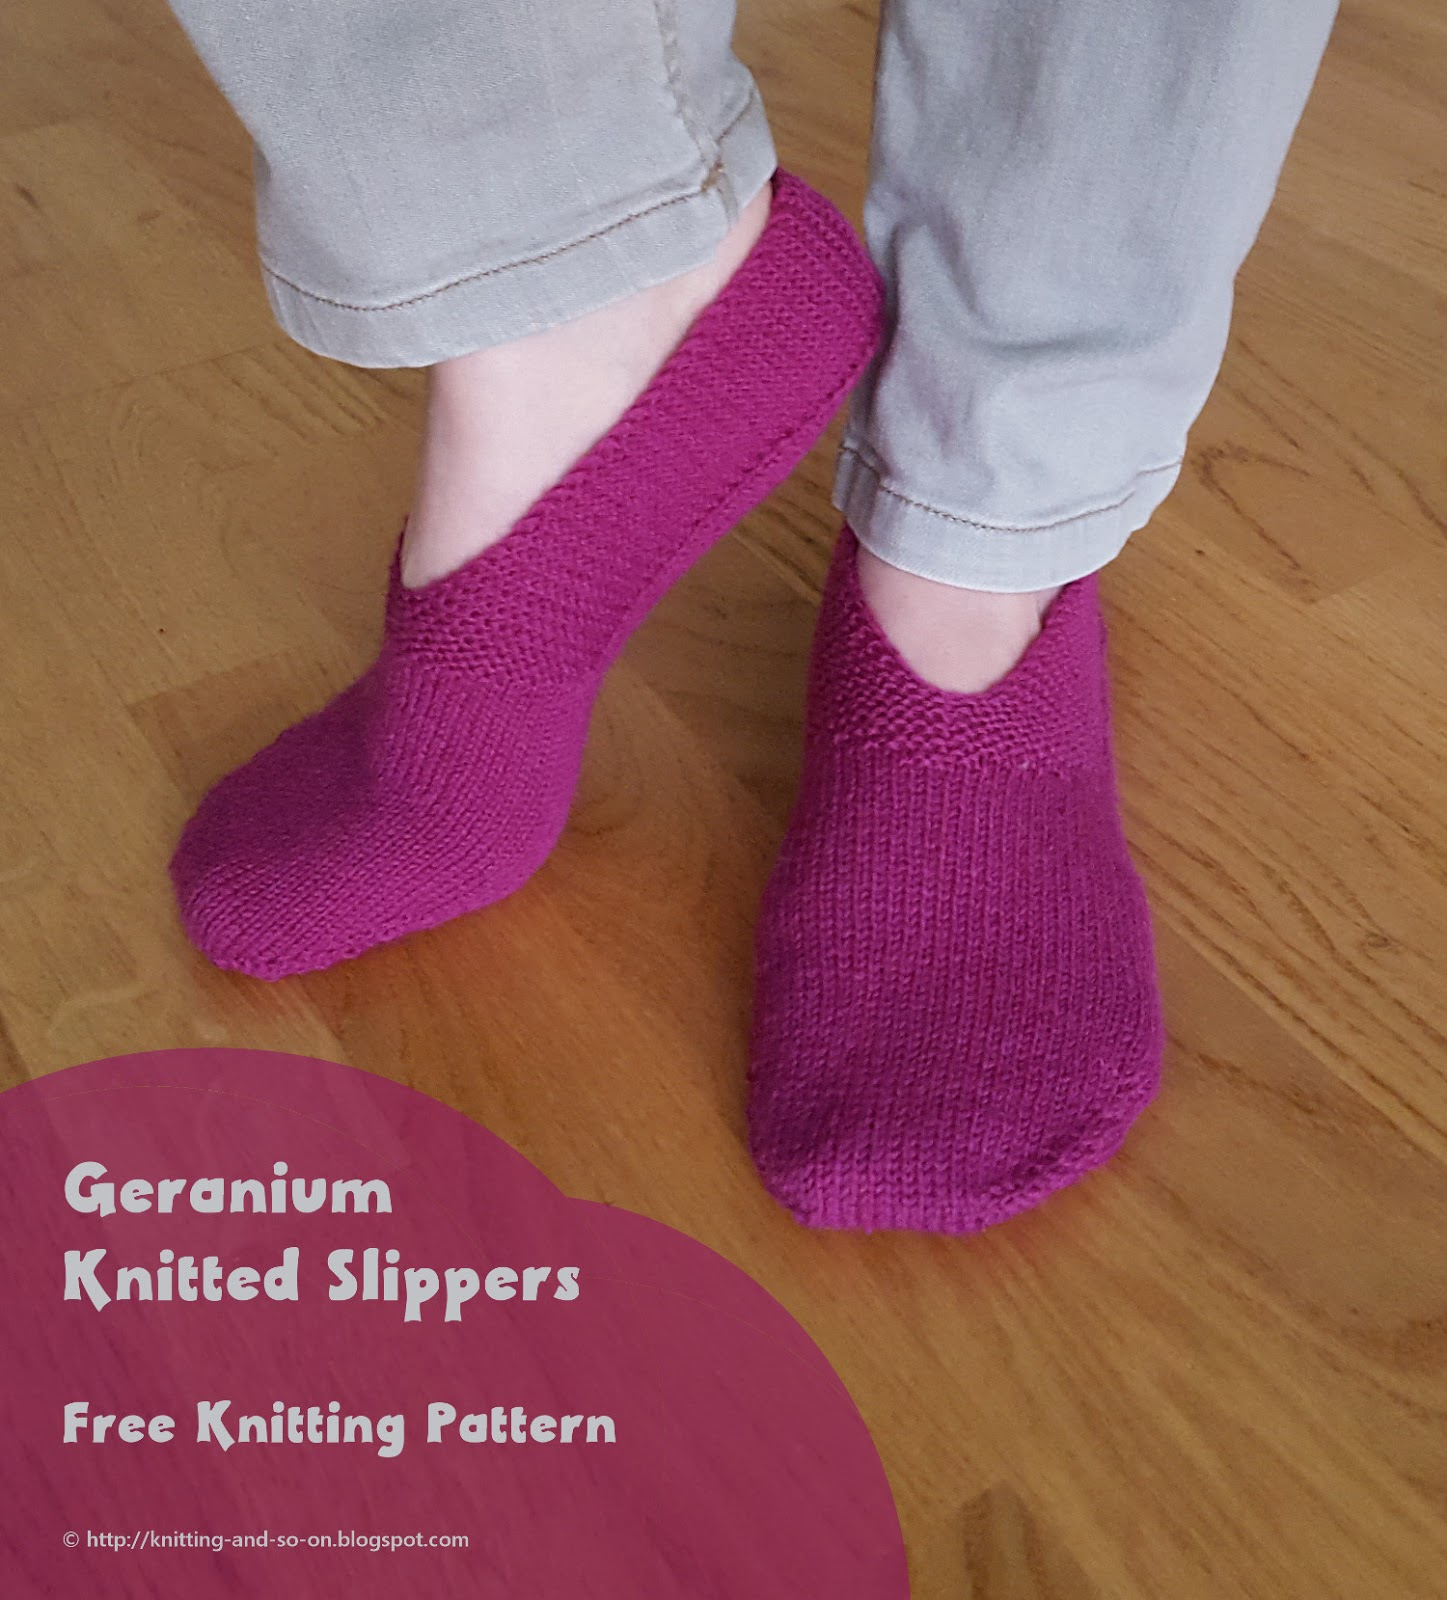 Free Patterns For Knitted Slippers Knitting And So On Geranium Knitted Slippers